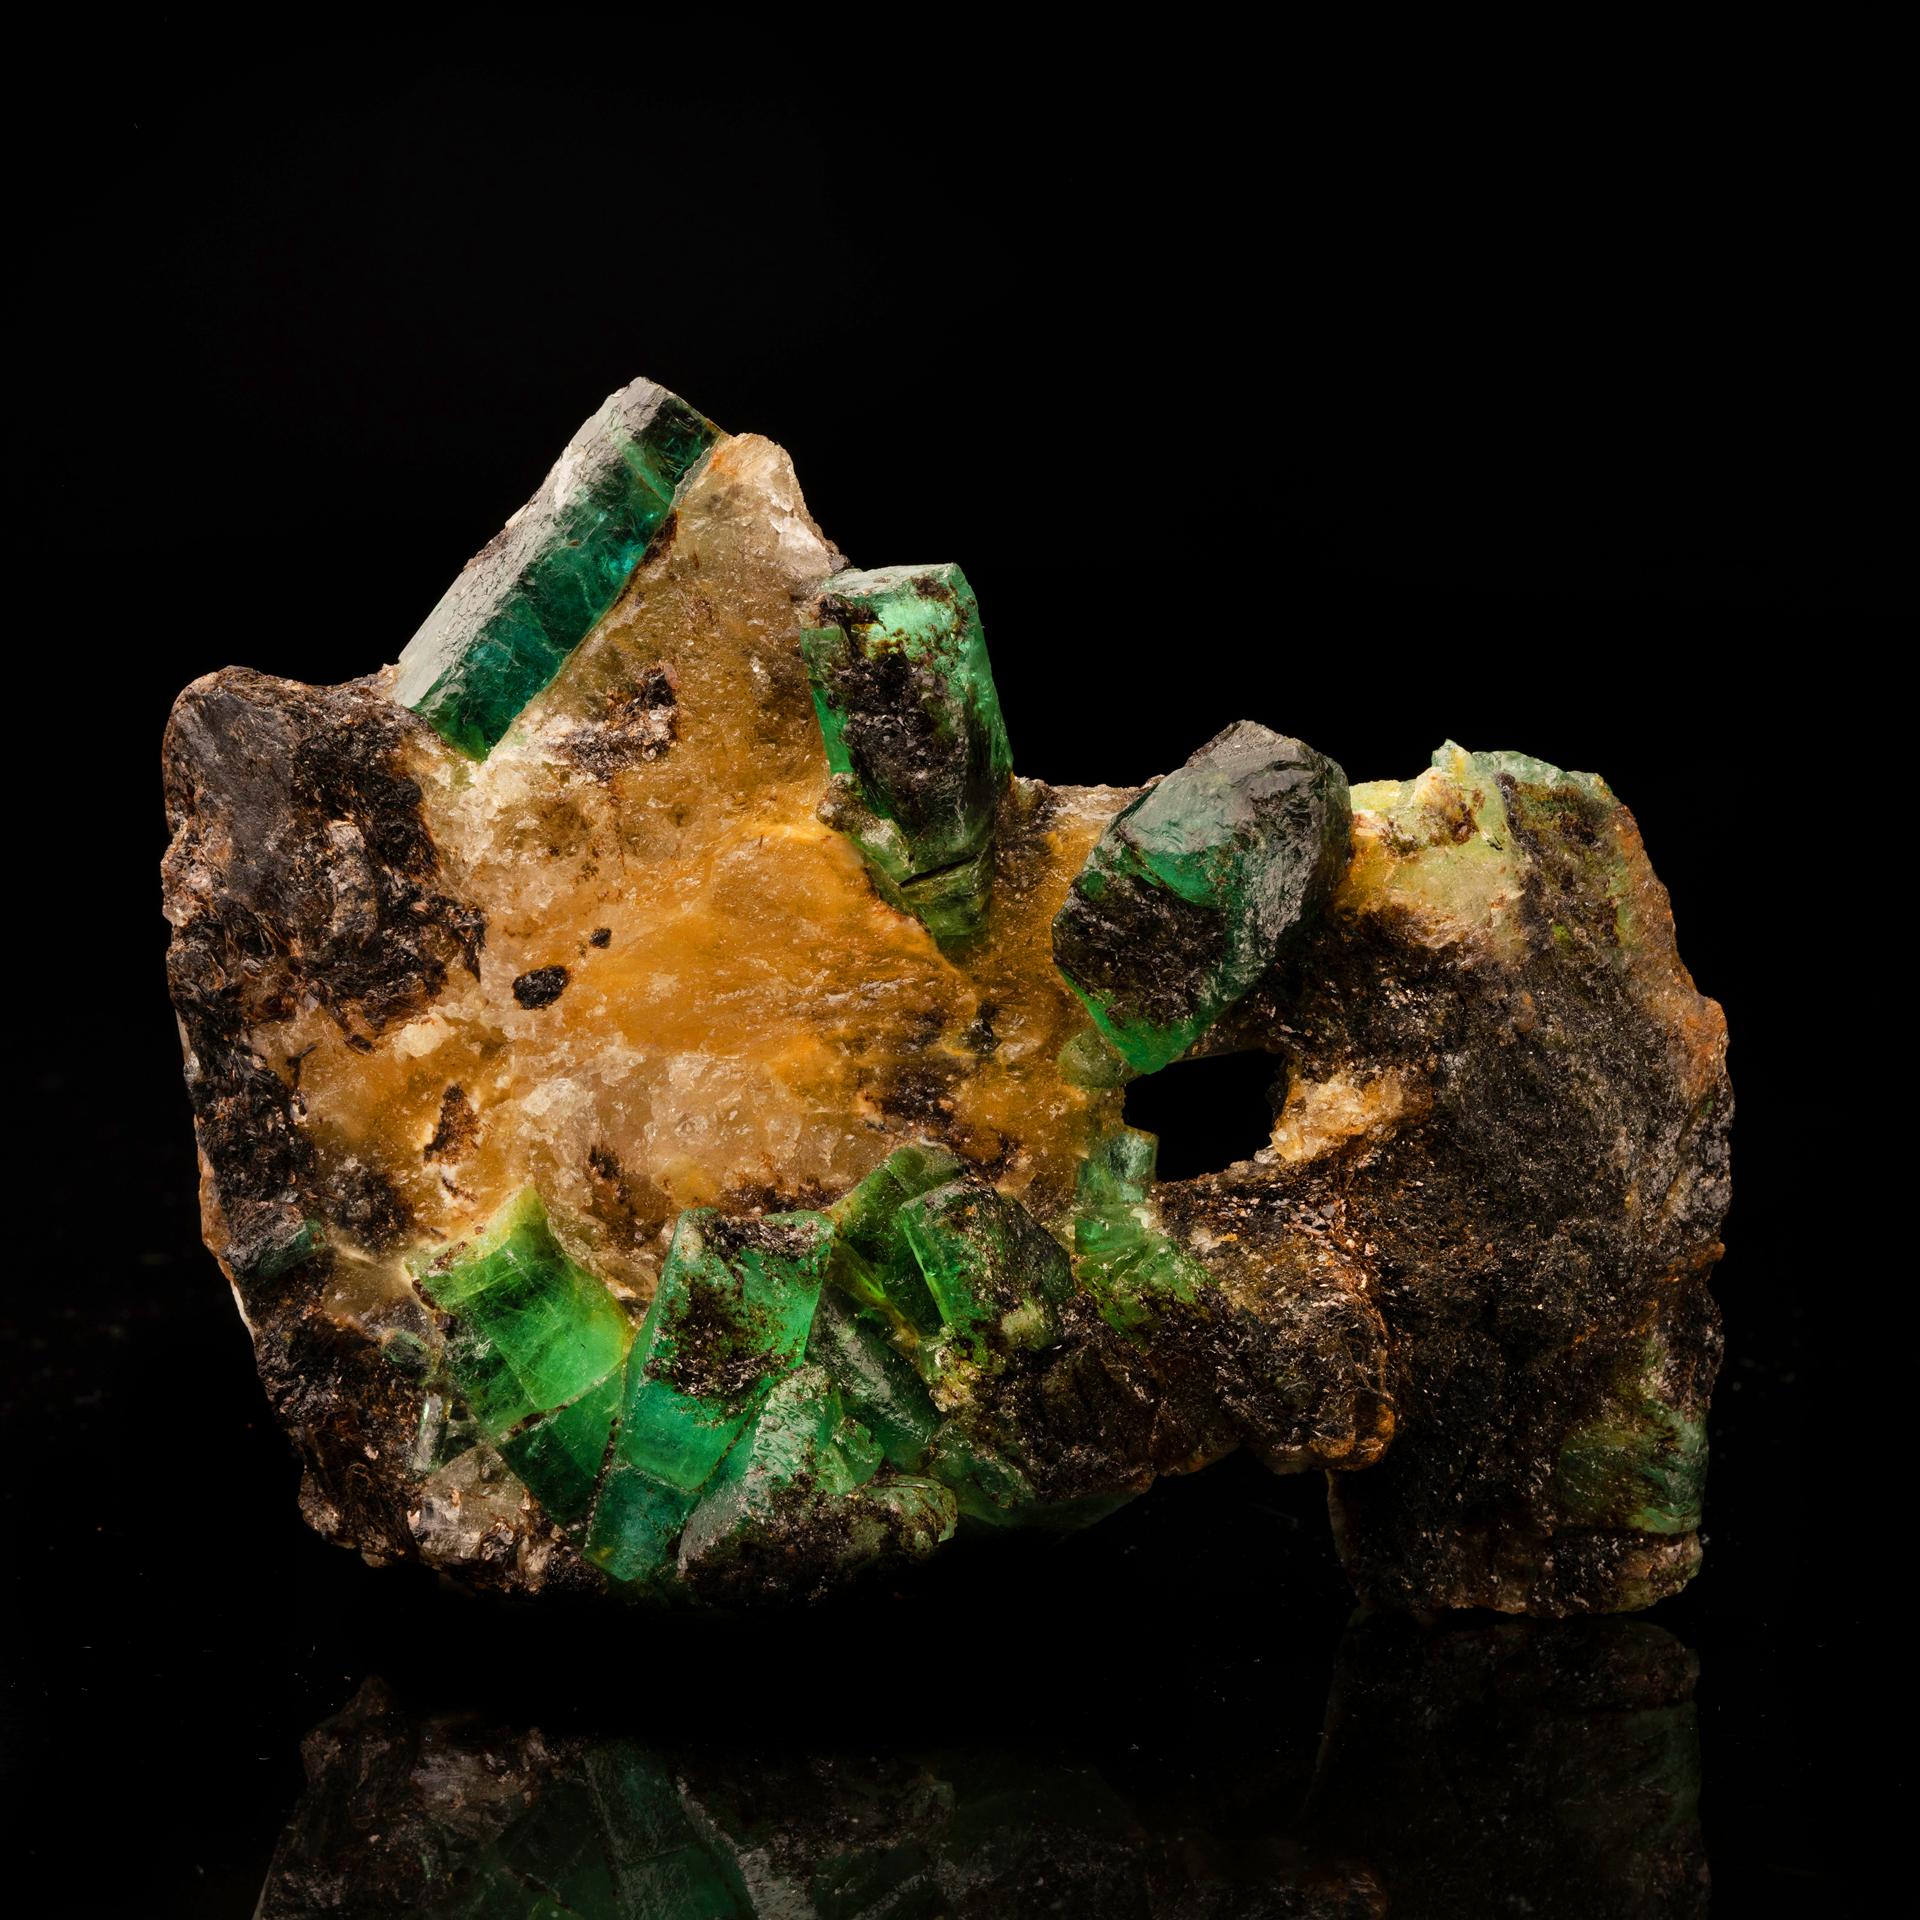 This luxurious offering serves up vibrant tones of verdant emerald on a canary yellow calcite and shimmering, earthy biotite matrix for a gemmy study in contrast. A unique and arresting acquisition sure to add color and style to your